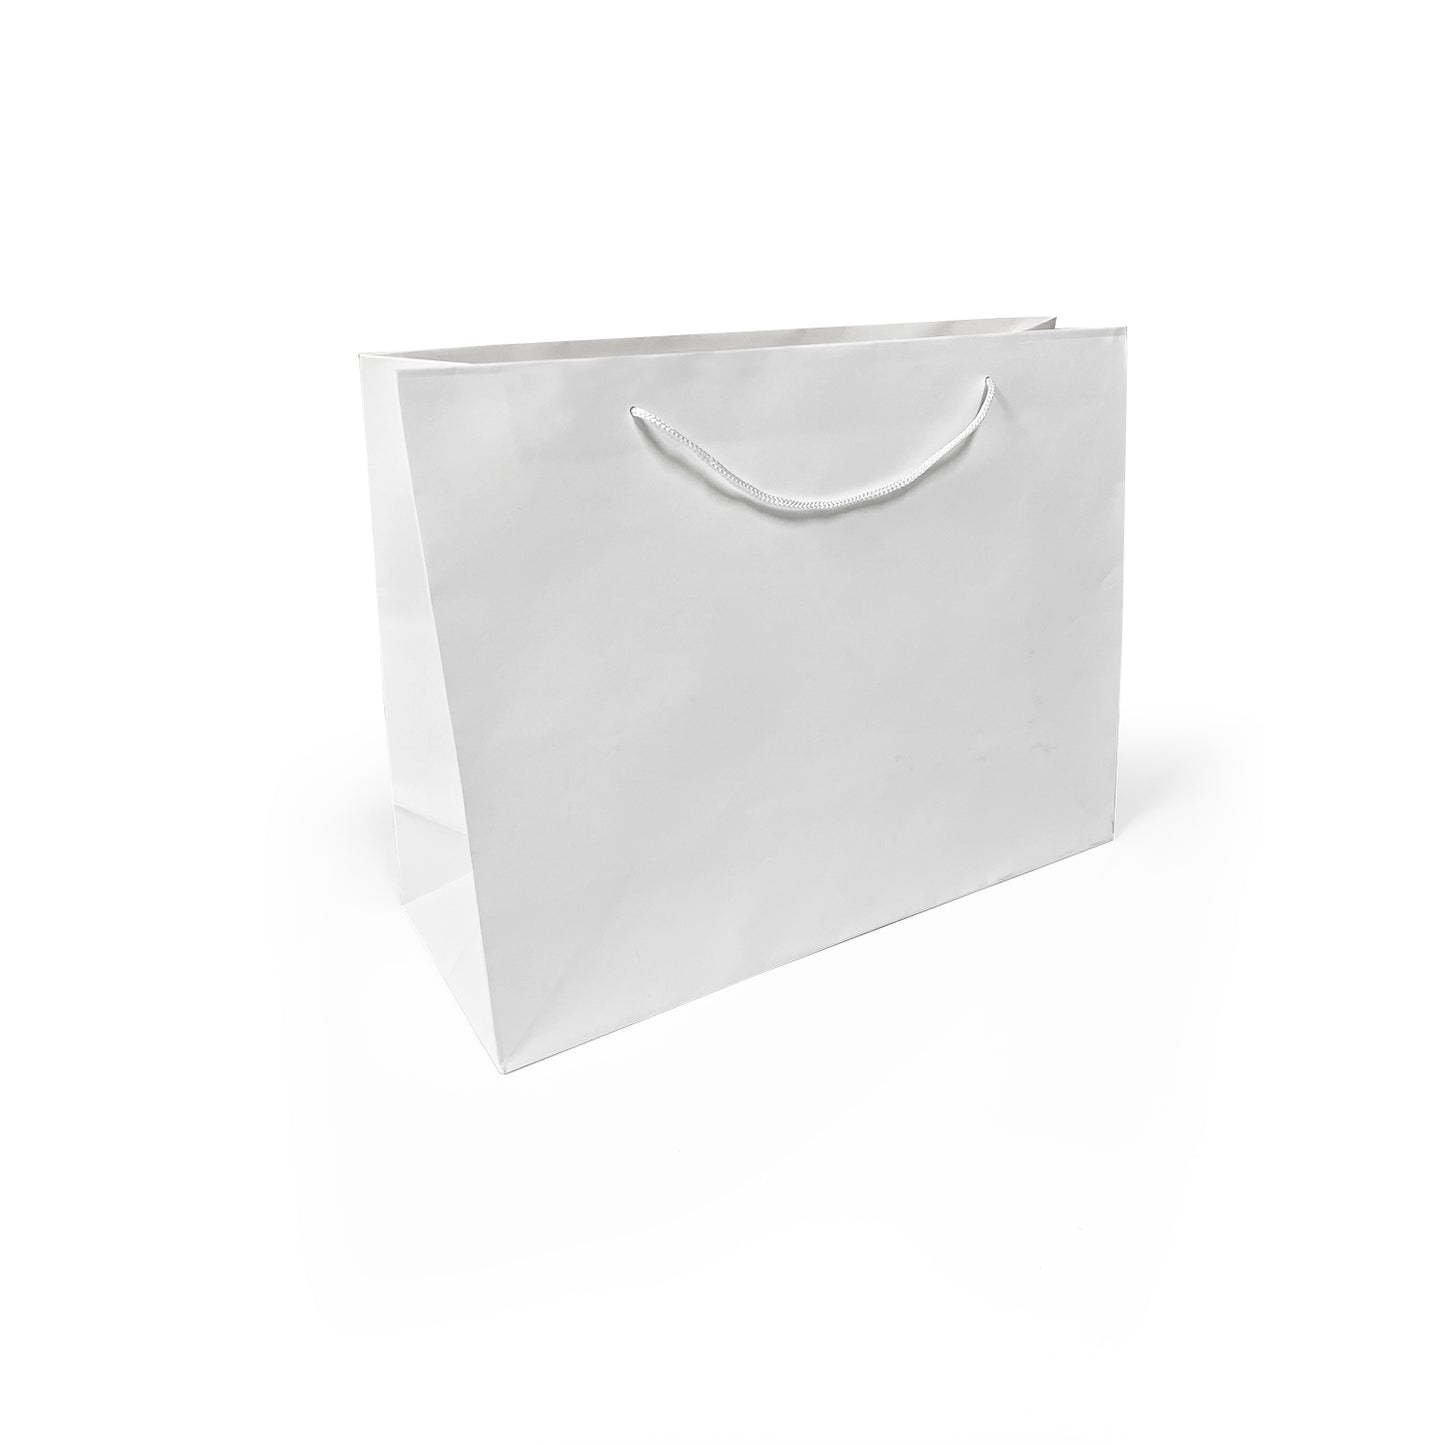 150 Pcs, Vogue, 16x6x12 inches, Euro Tote Paper Bags, with Rope Handle